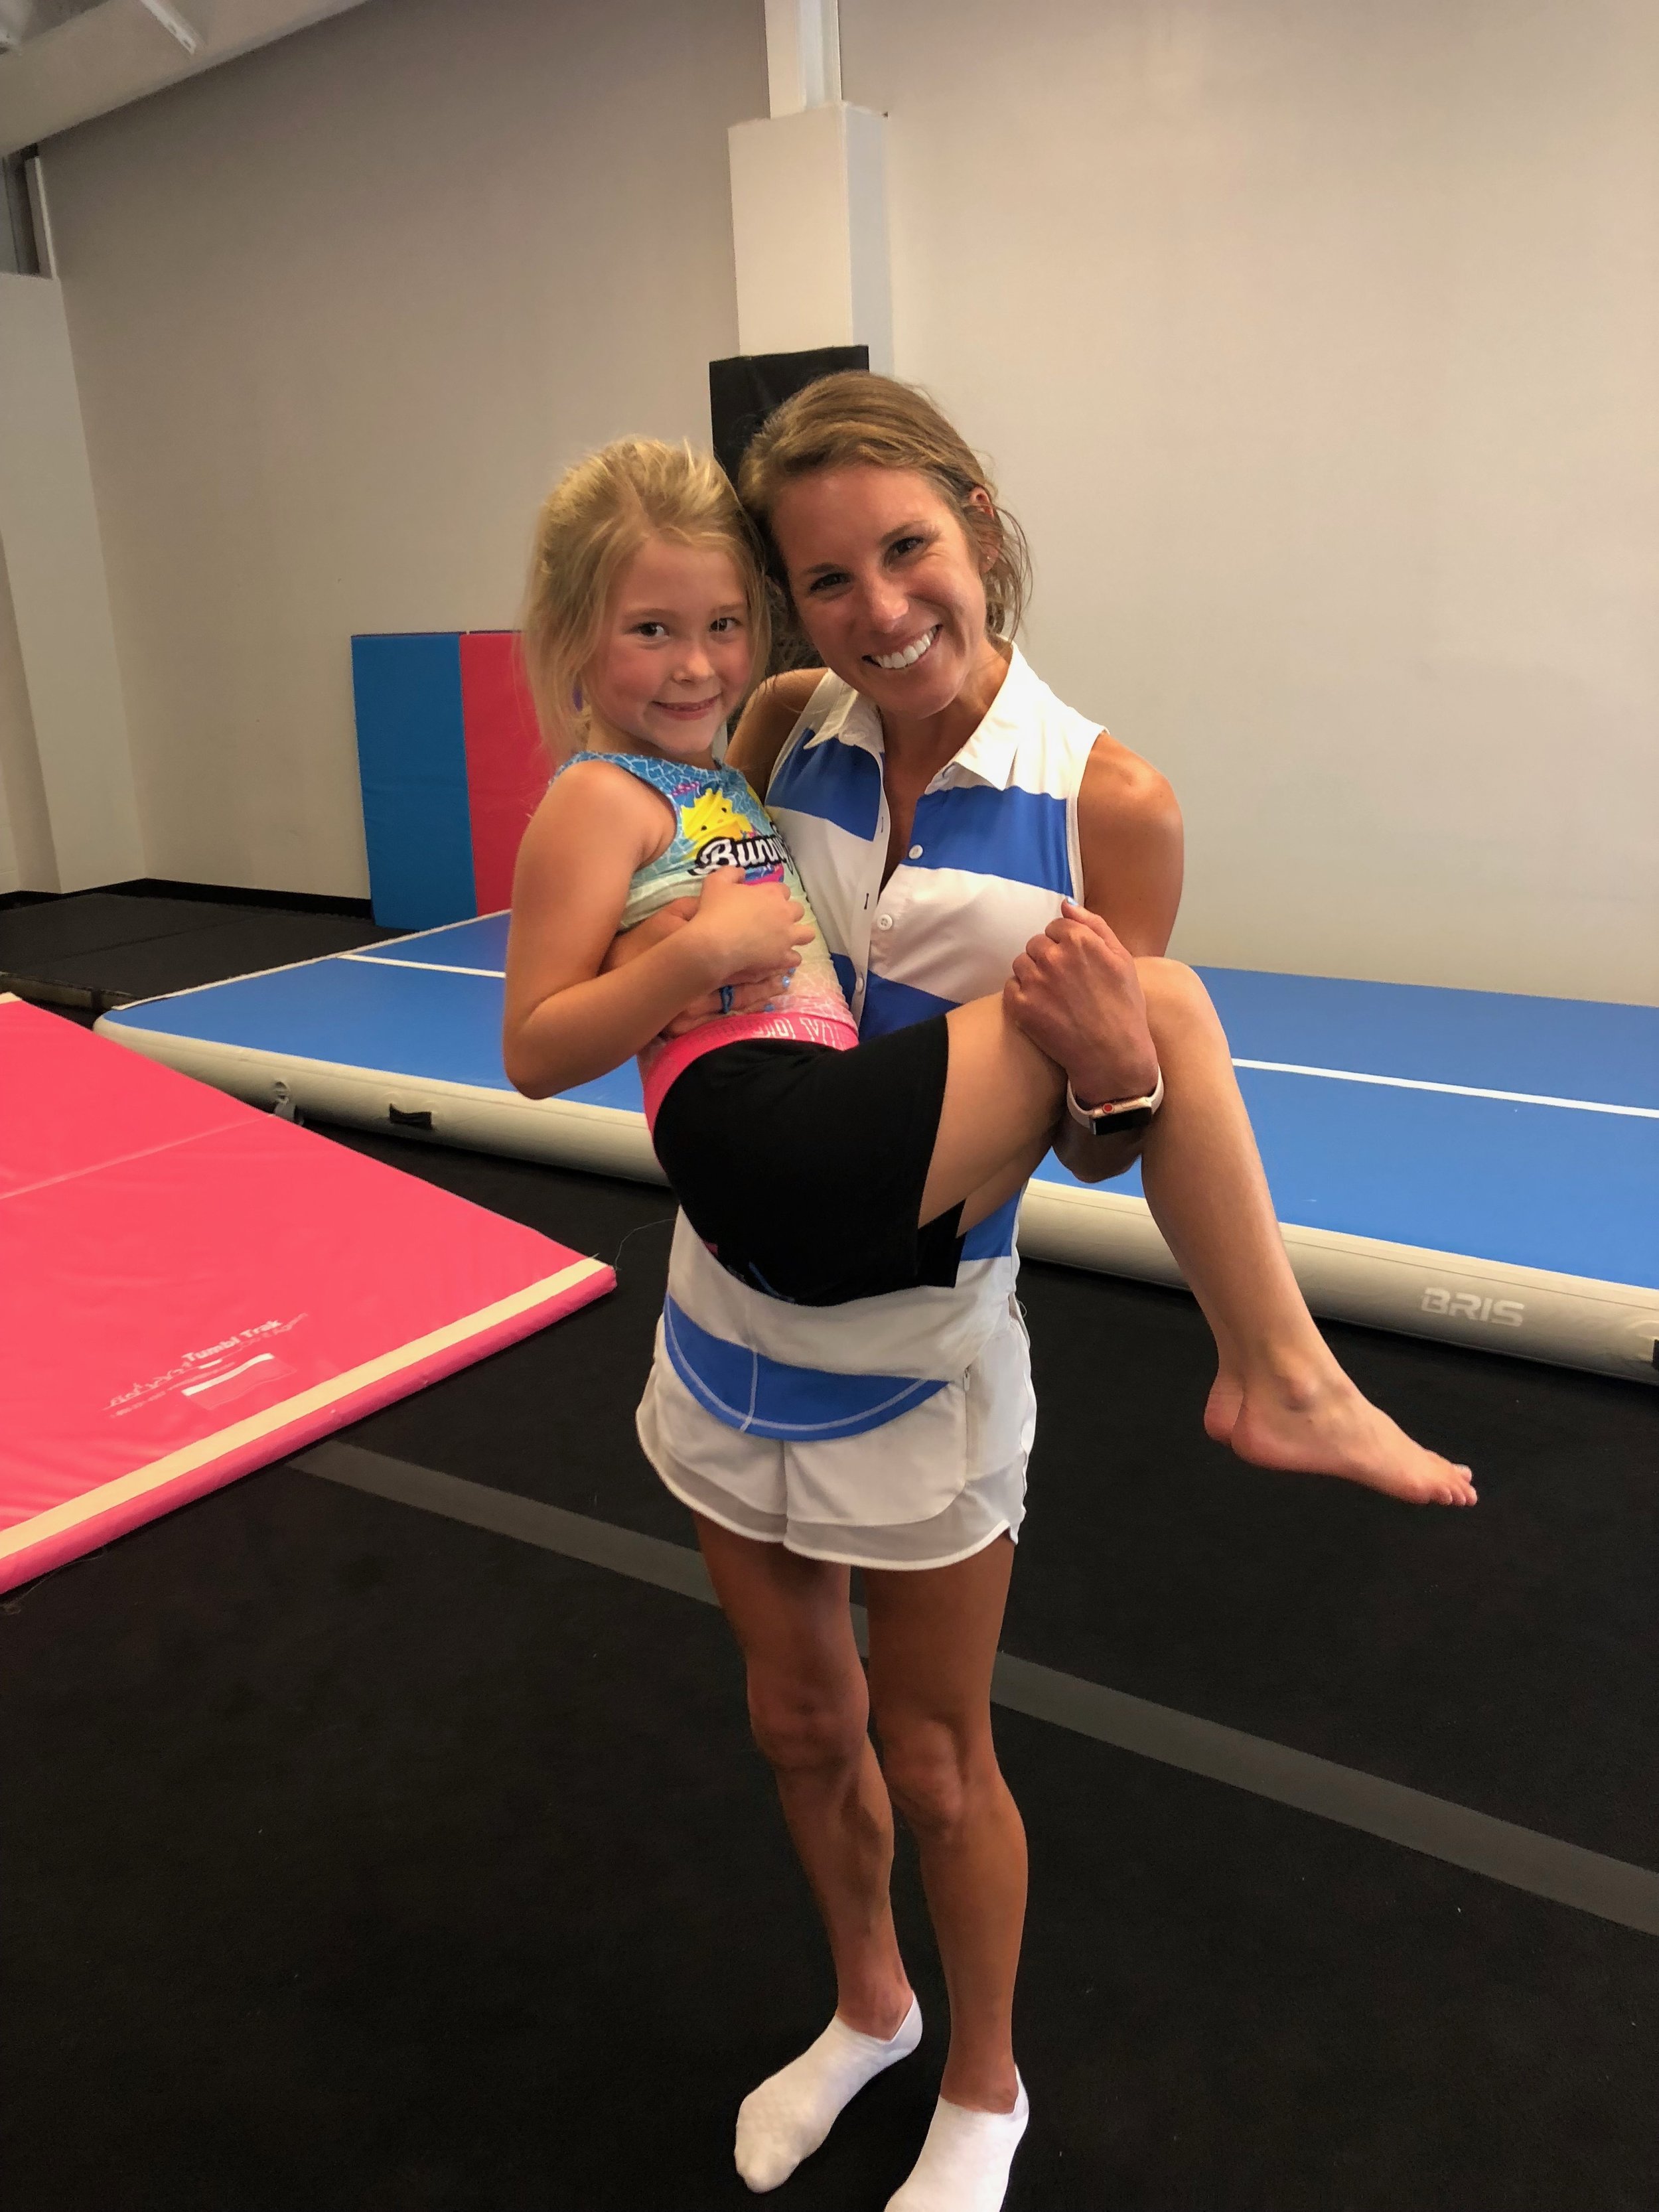 Tumbling, private lessons